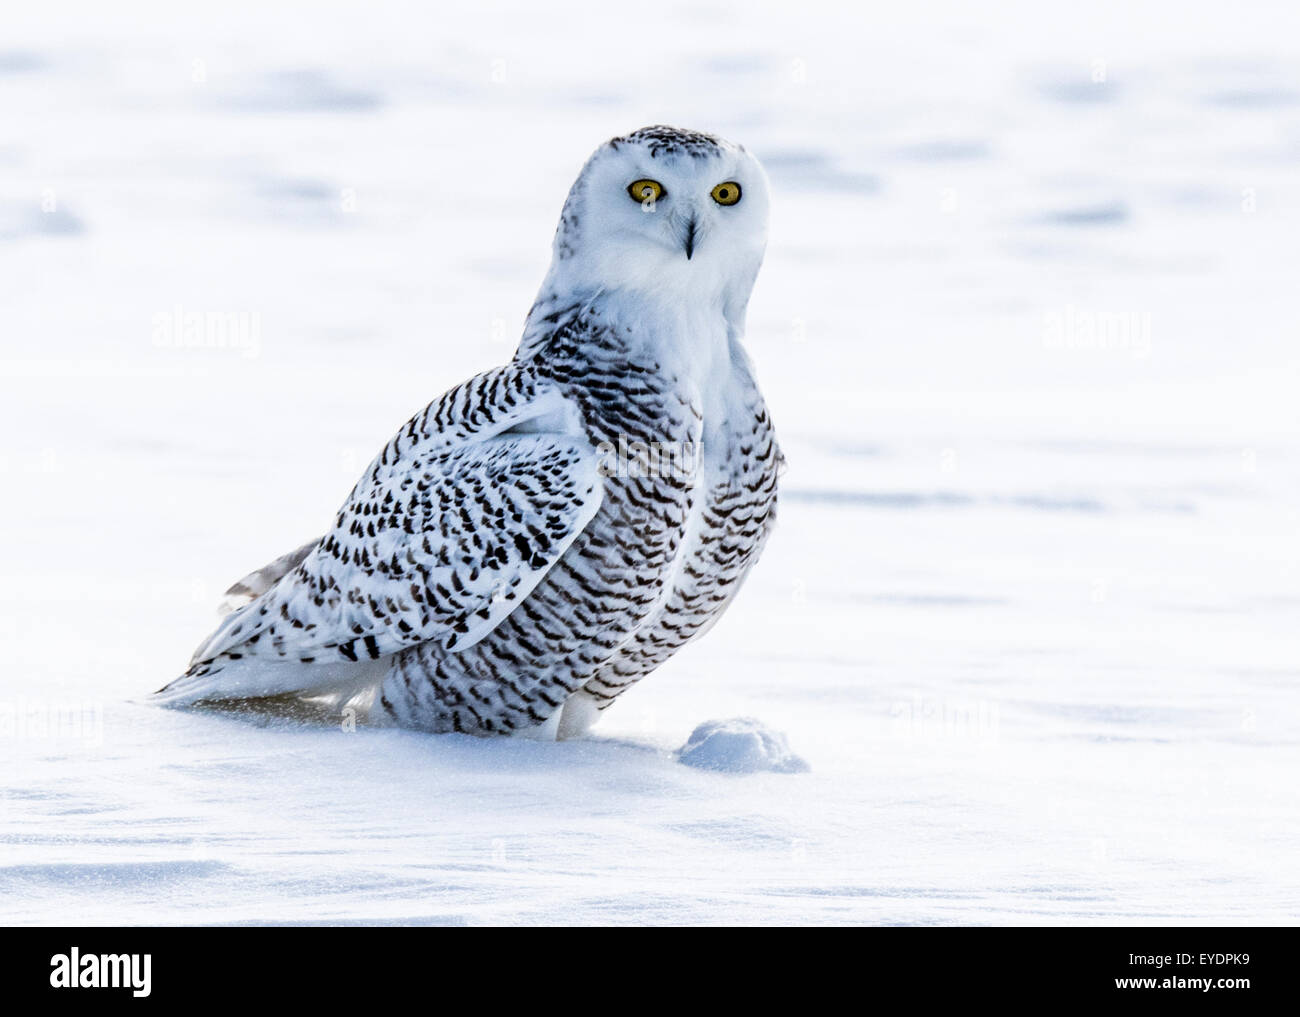 Snowy owl sitting in the snow Stock Photo